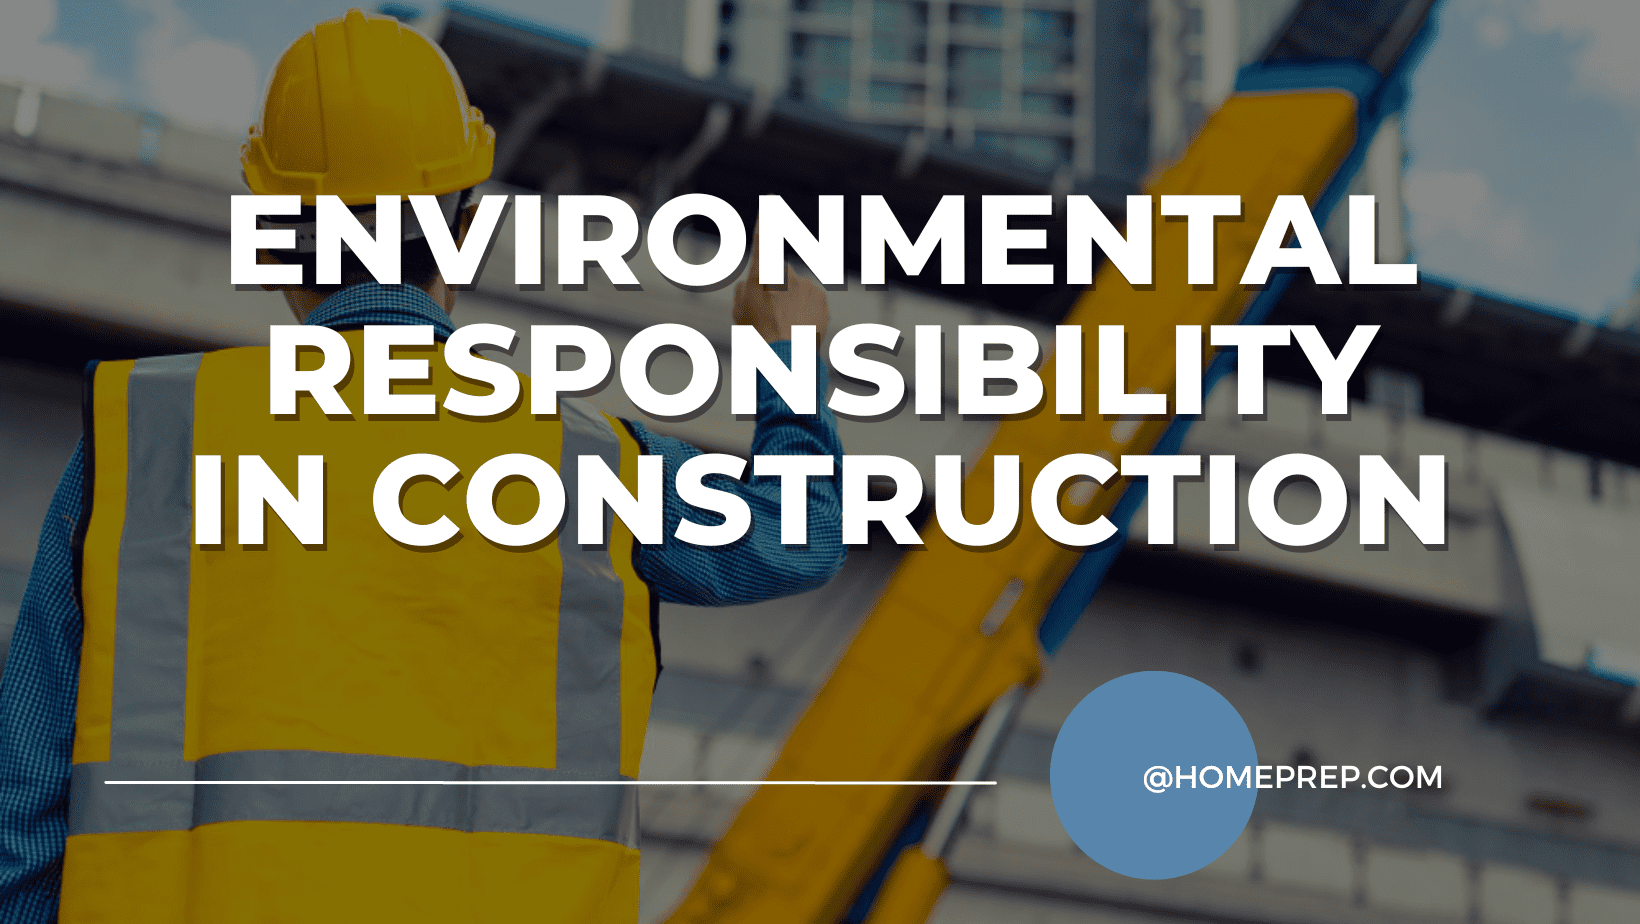 Environmental Responsibility in Construction: How @HomePrep Promotes Sustainable Practices